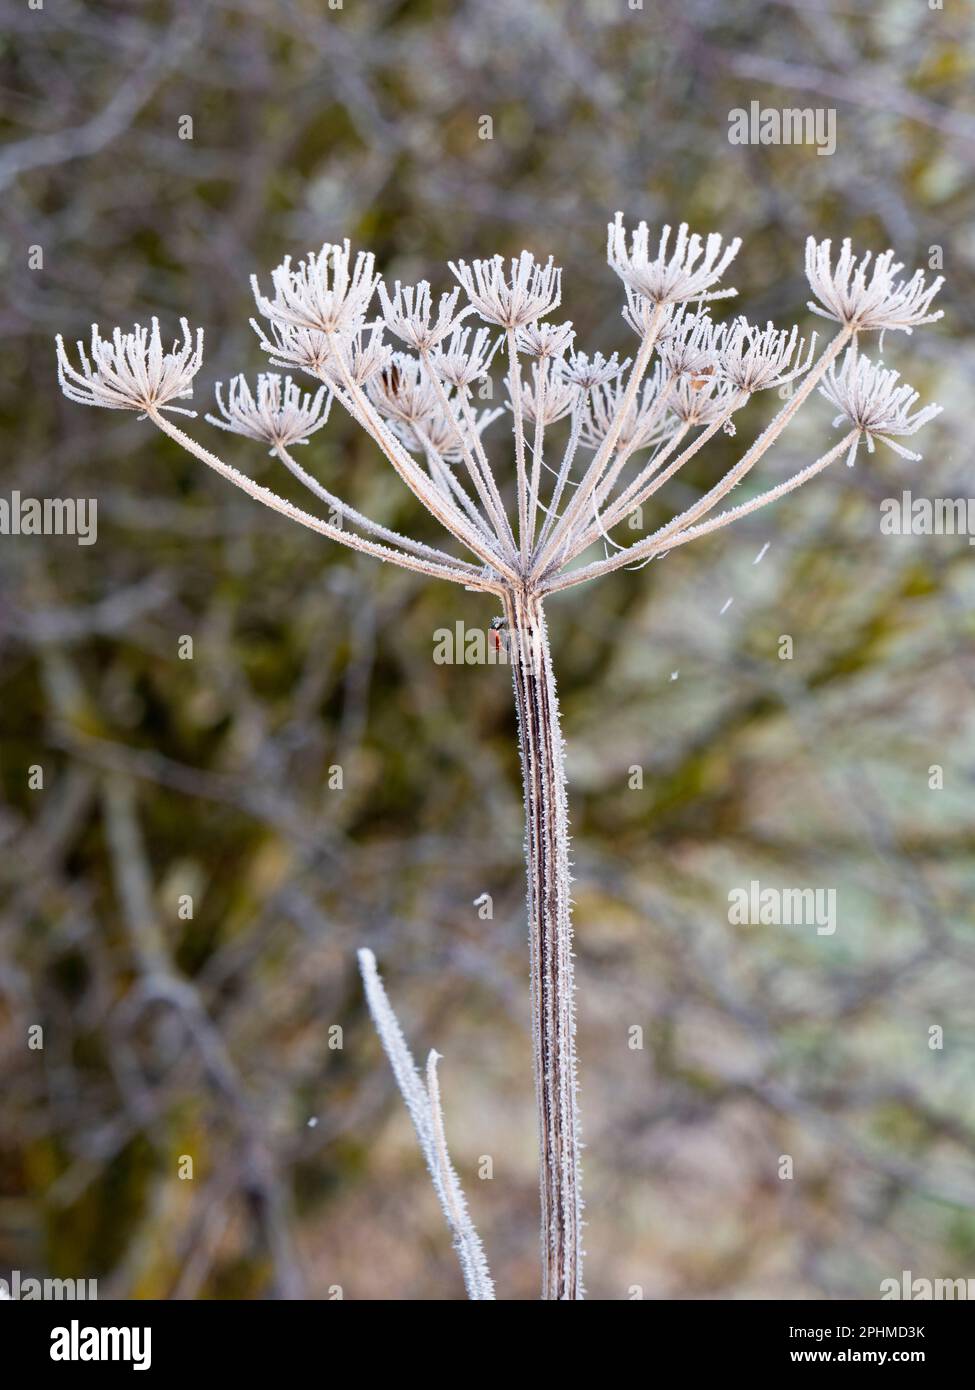 Anthriscus sylvestris, known as cow parsley is a herbaceous biennial or short-lived perennial plant in the family Apiaceae. It's very common in meadow Stock Photo